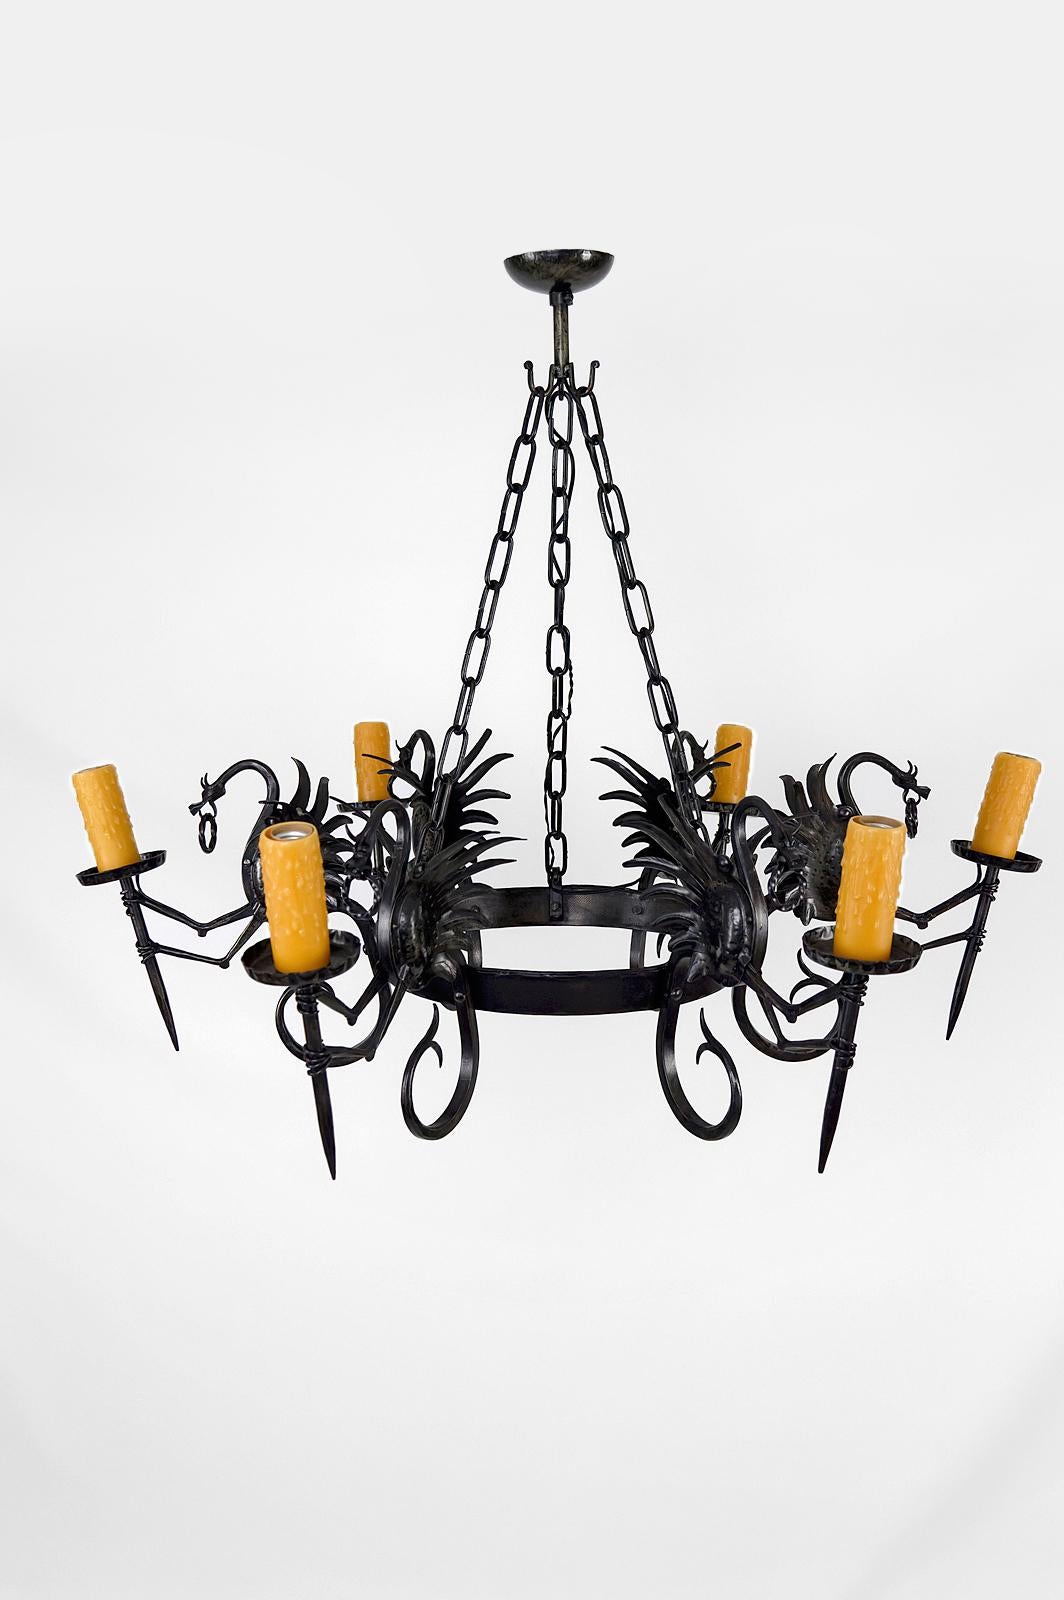 Superb and impressive wrought iron chandelier / pendant composed of 6 winged dragons each holding a torch / torchiere.

Good quality of manufacture: well-made subjects, beautiful patina of the metal.

Neo-Gothic / Art Nouveau / Liberty style, Italy,